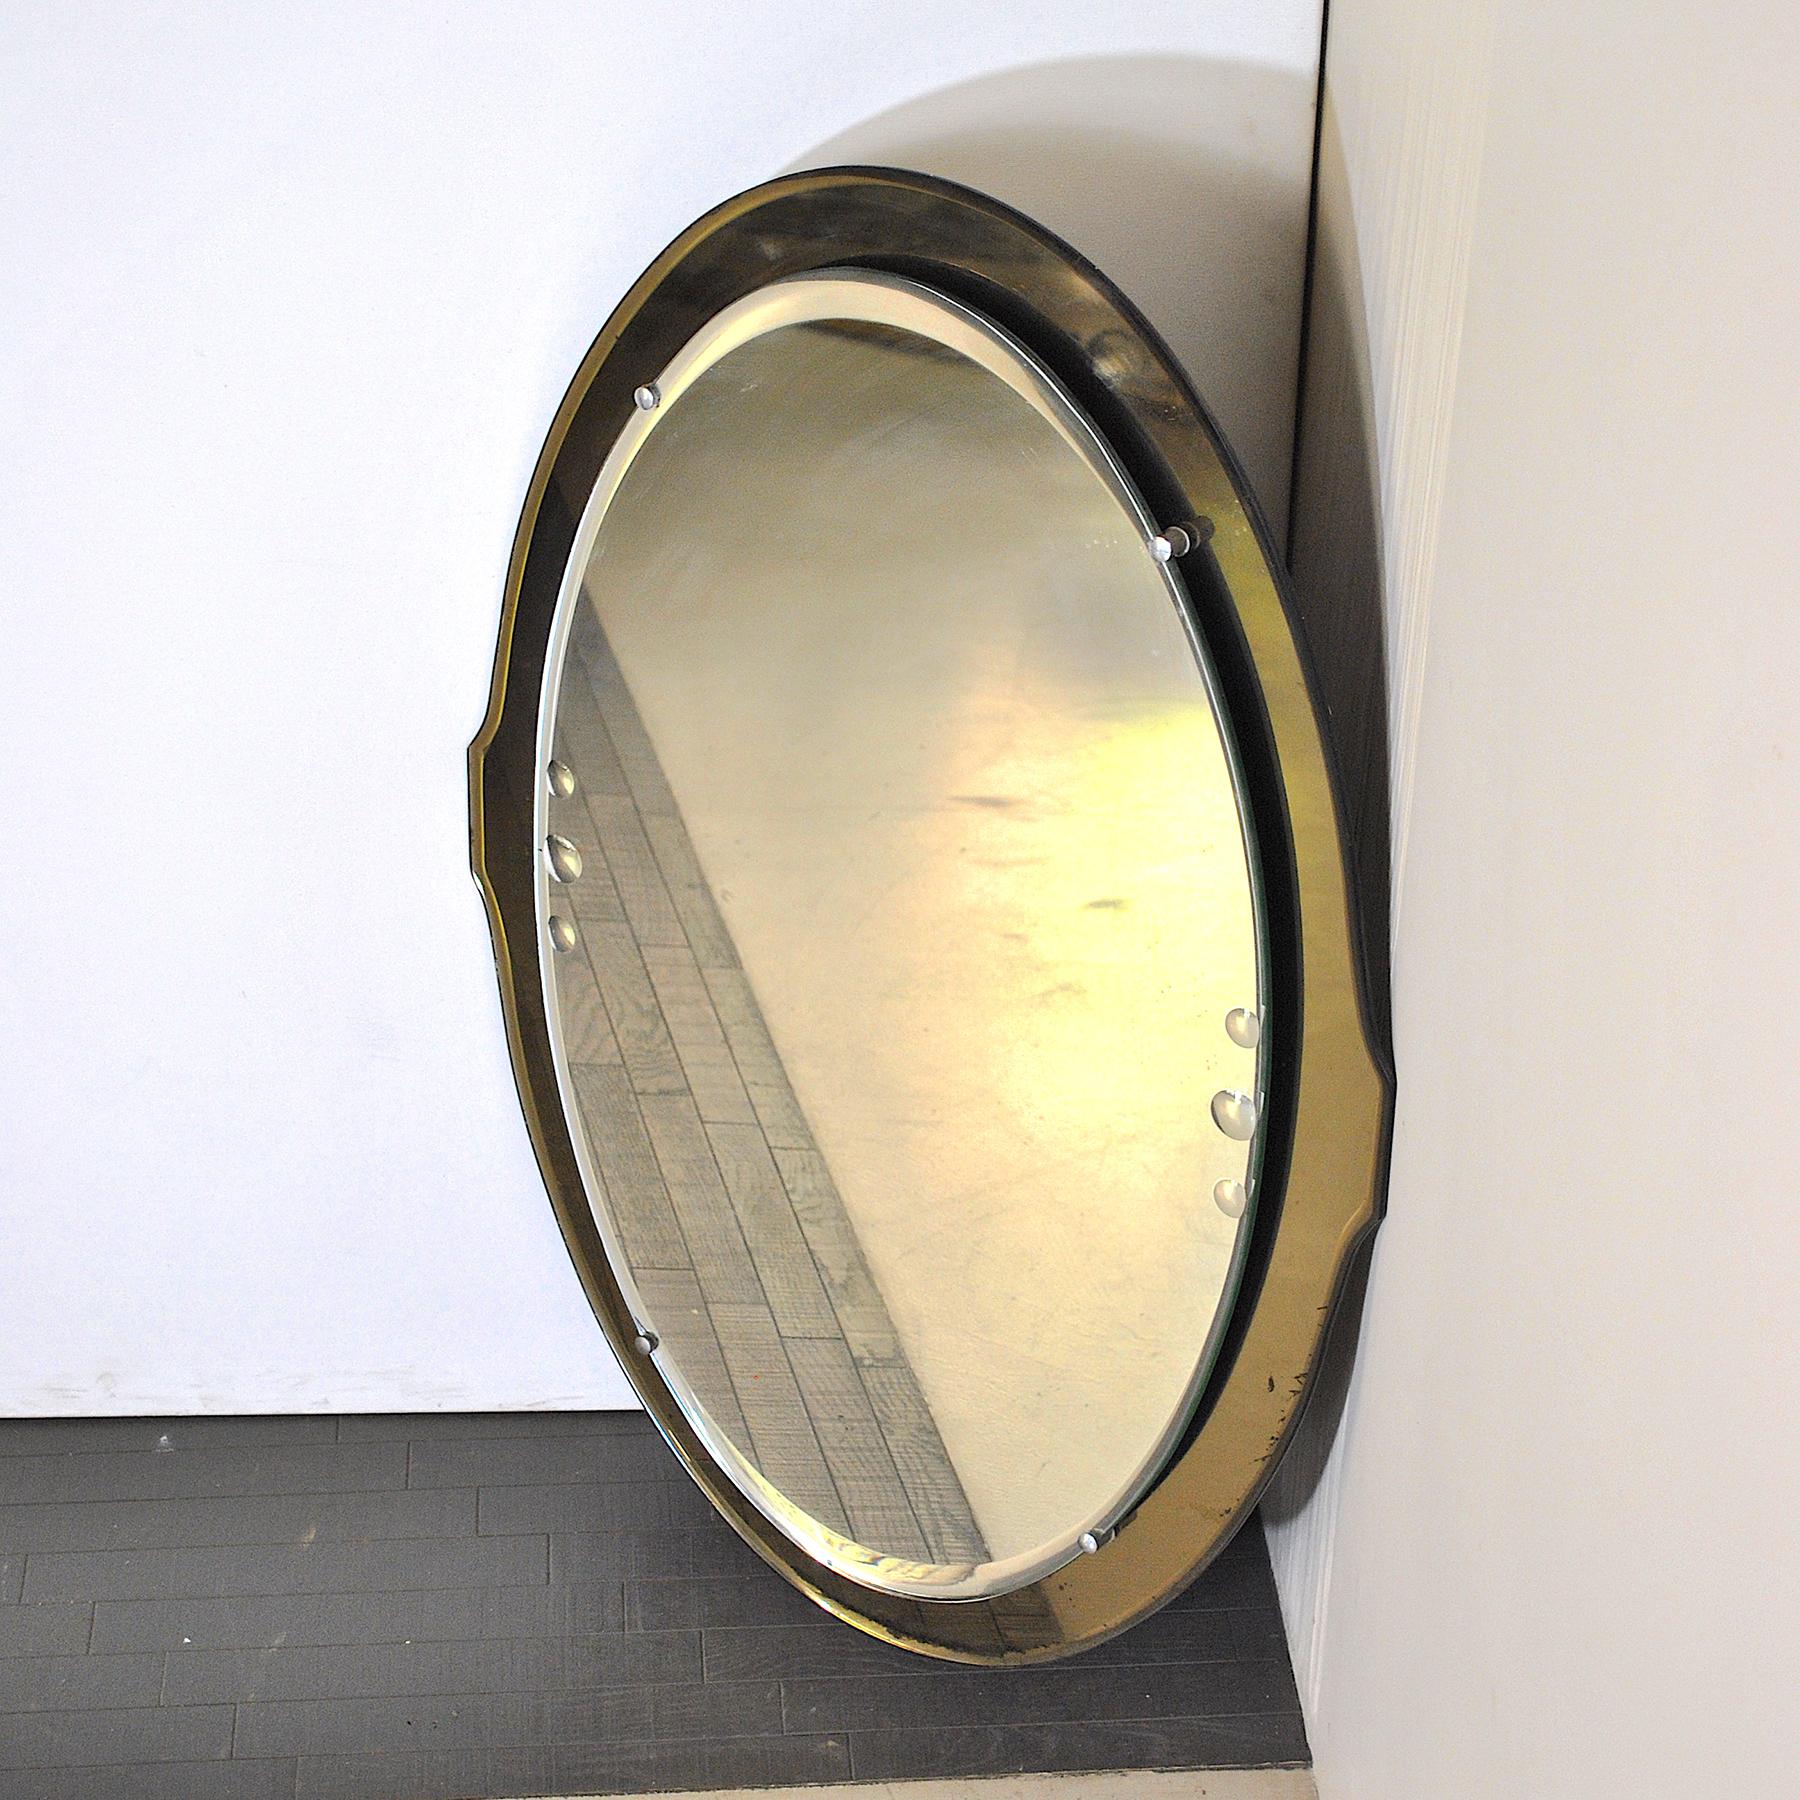 Cristal Art oval mirror worked inside and ground on the perimeter.